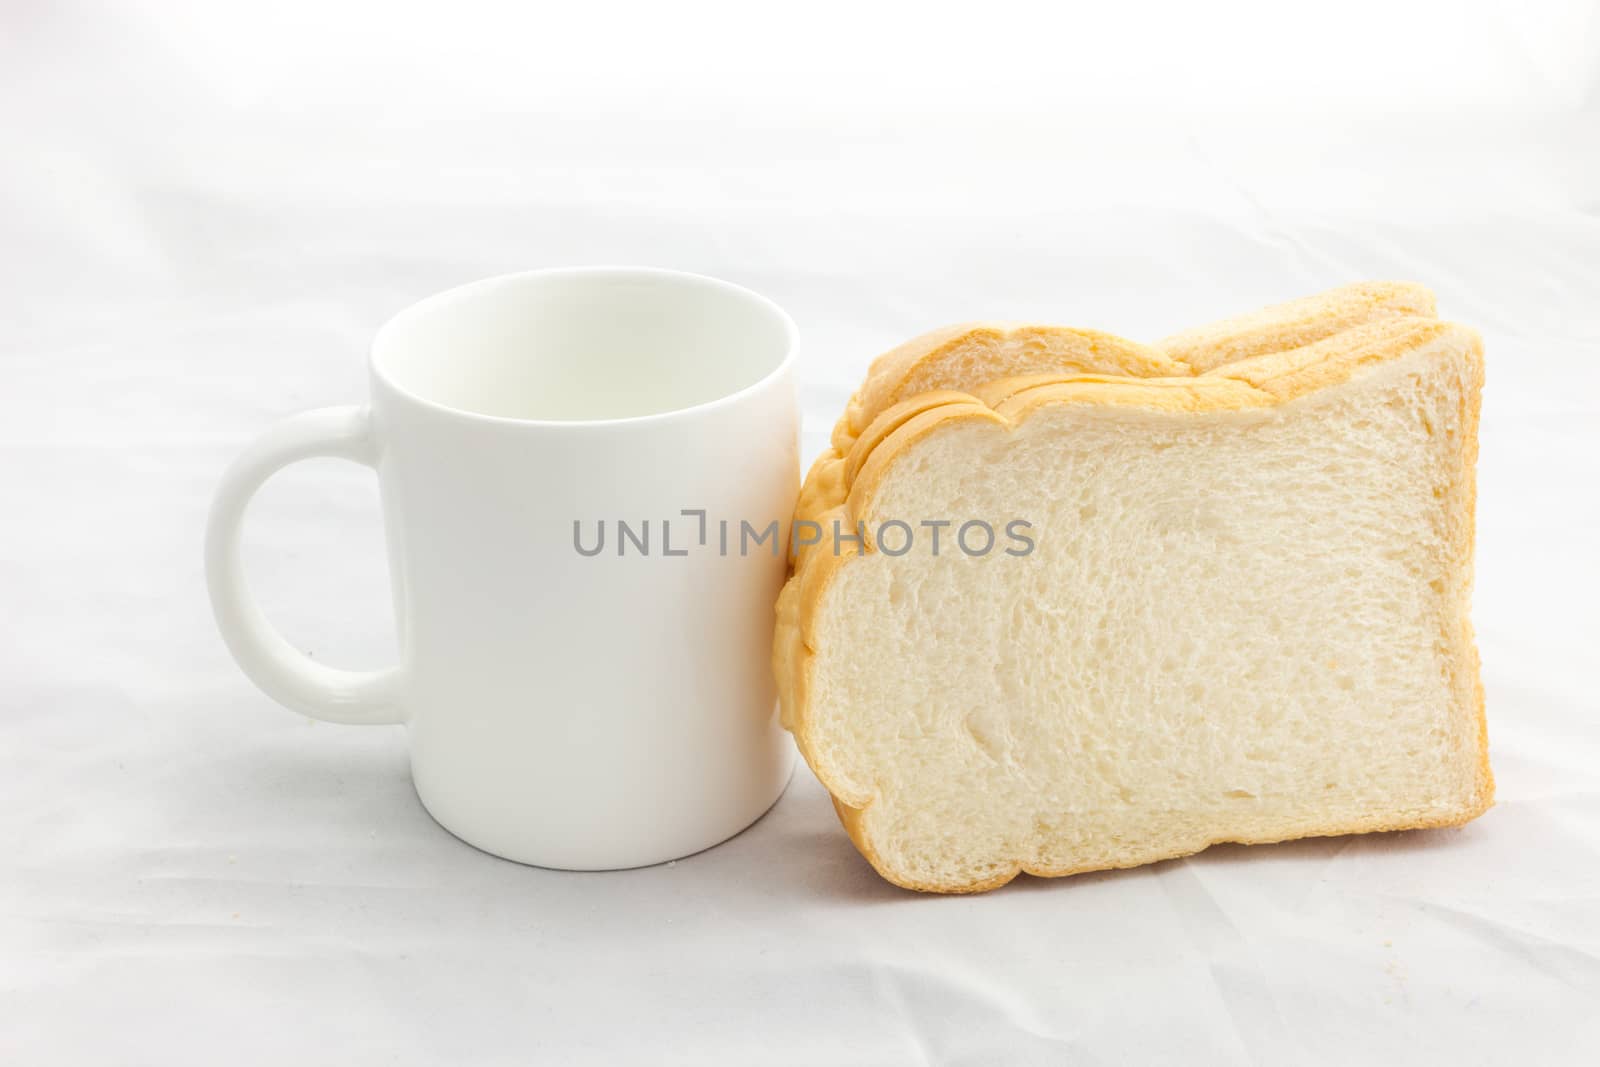 Empty coffee cup or coffee mug and sliced bread isolated on white background.